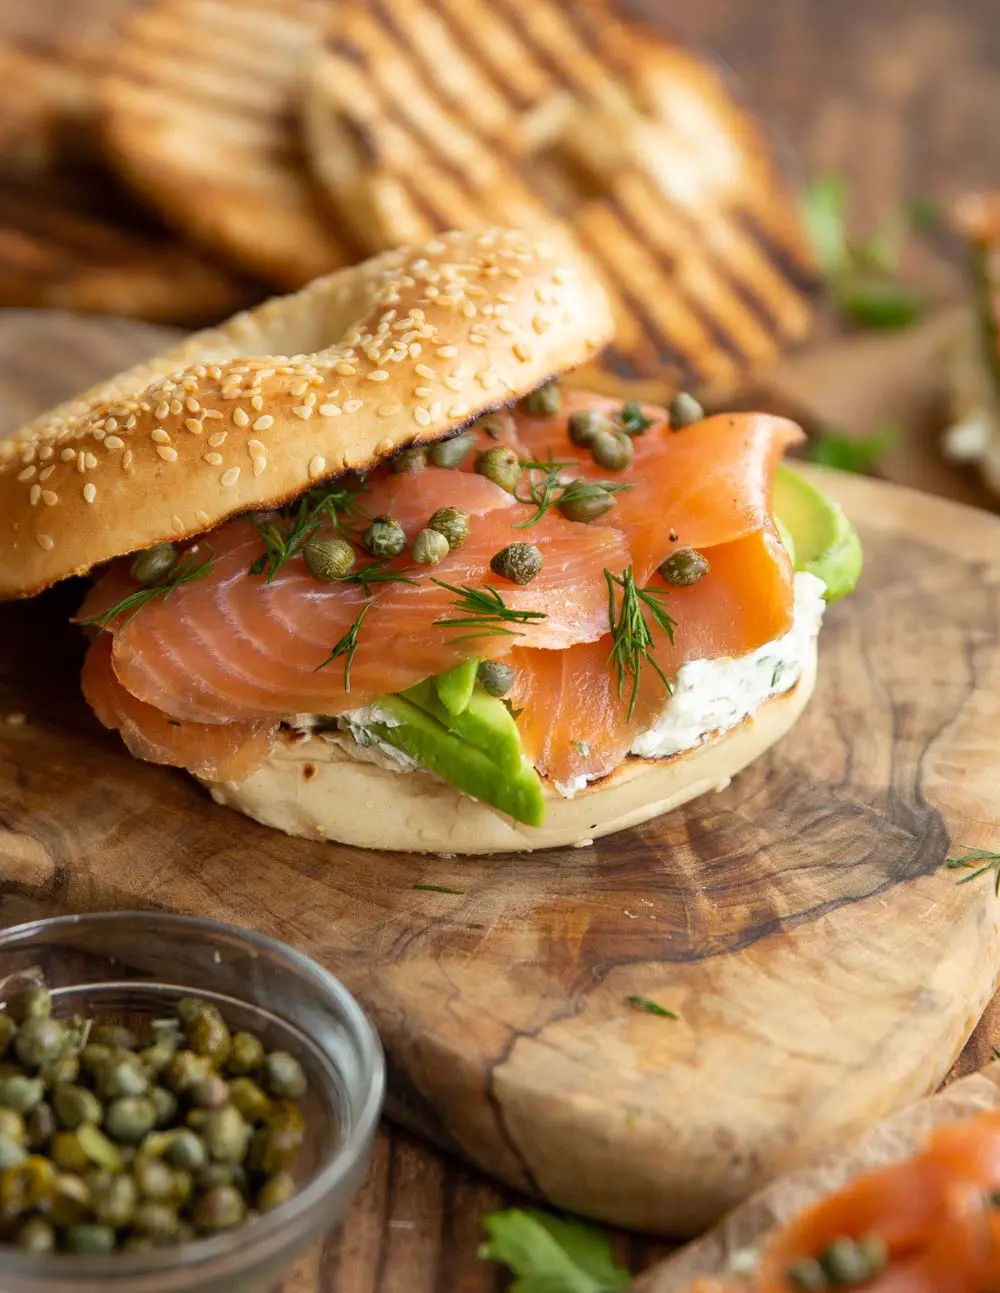 calories in a smoked salmon and cream cheese bagel - How many calories are in a bagel with cream cheese and smoked salmon